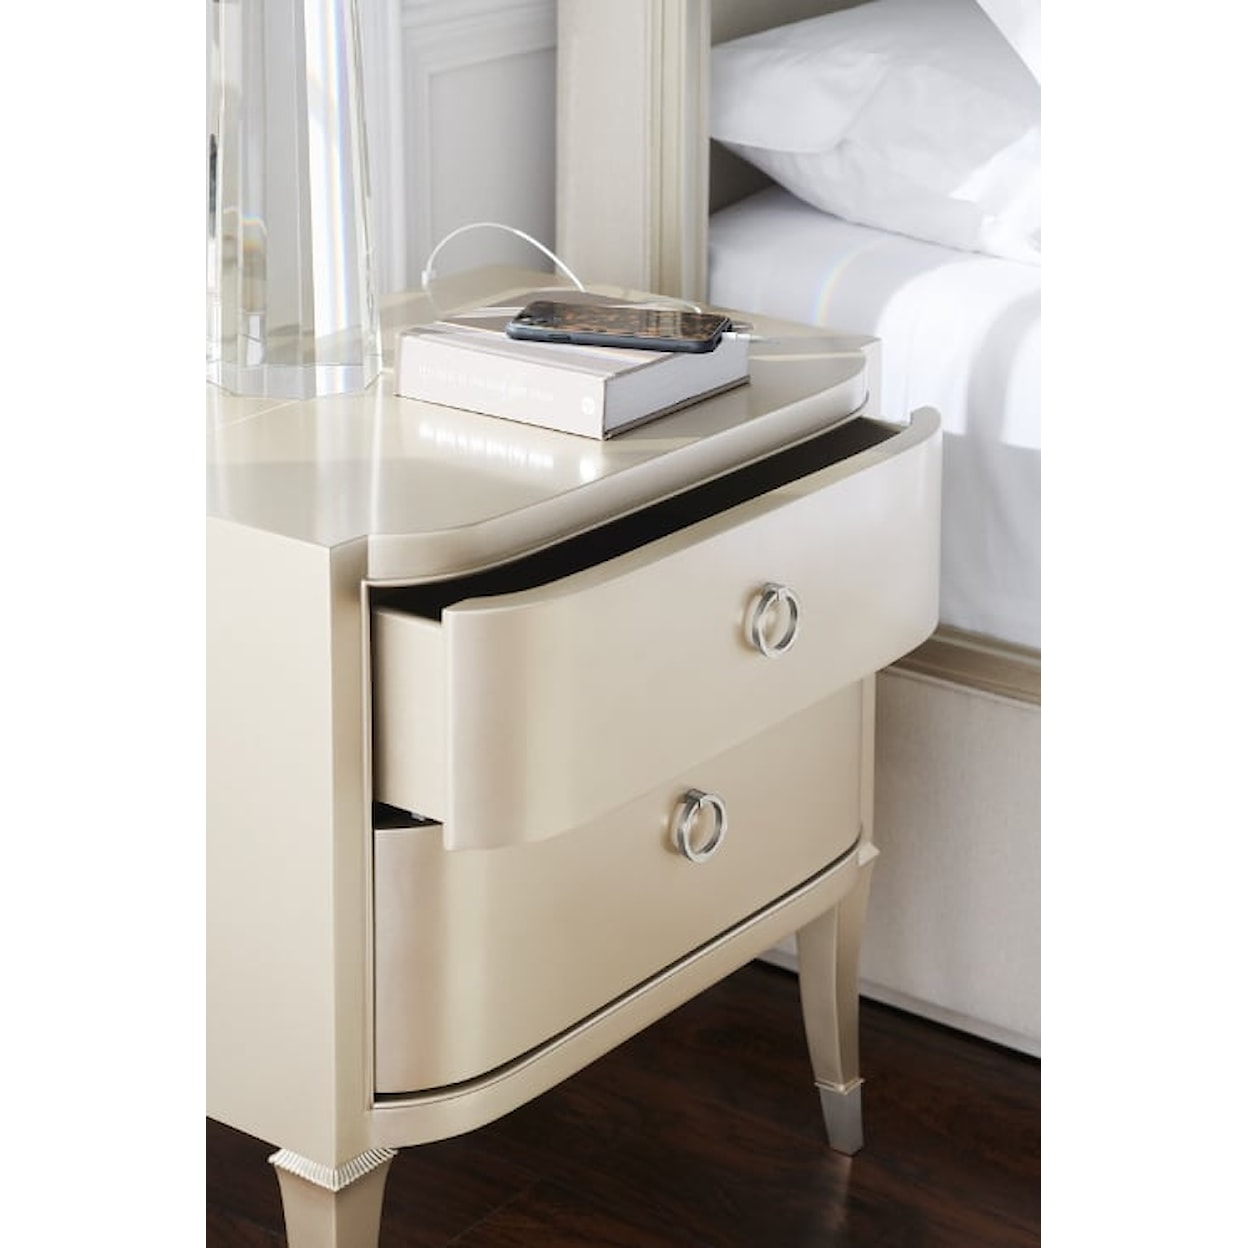 Caracole Caracole Classic Significant Other Nightstand